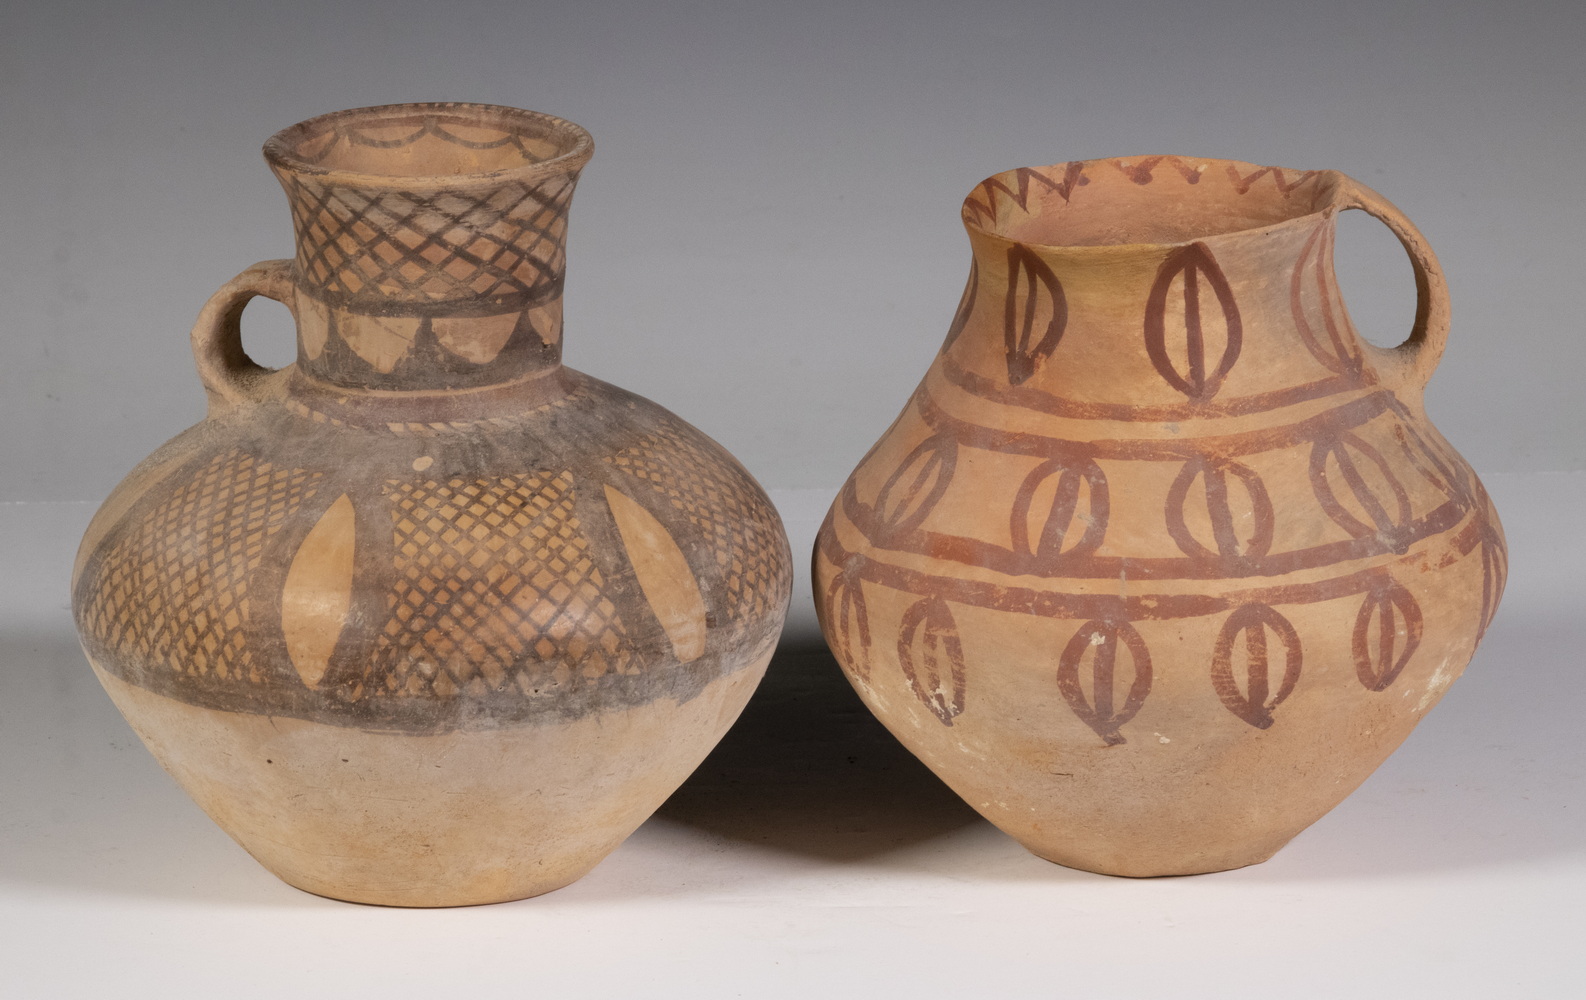  2 CHINESE NEOLITHIC POTTERY JARS  2b3d04